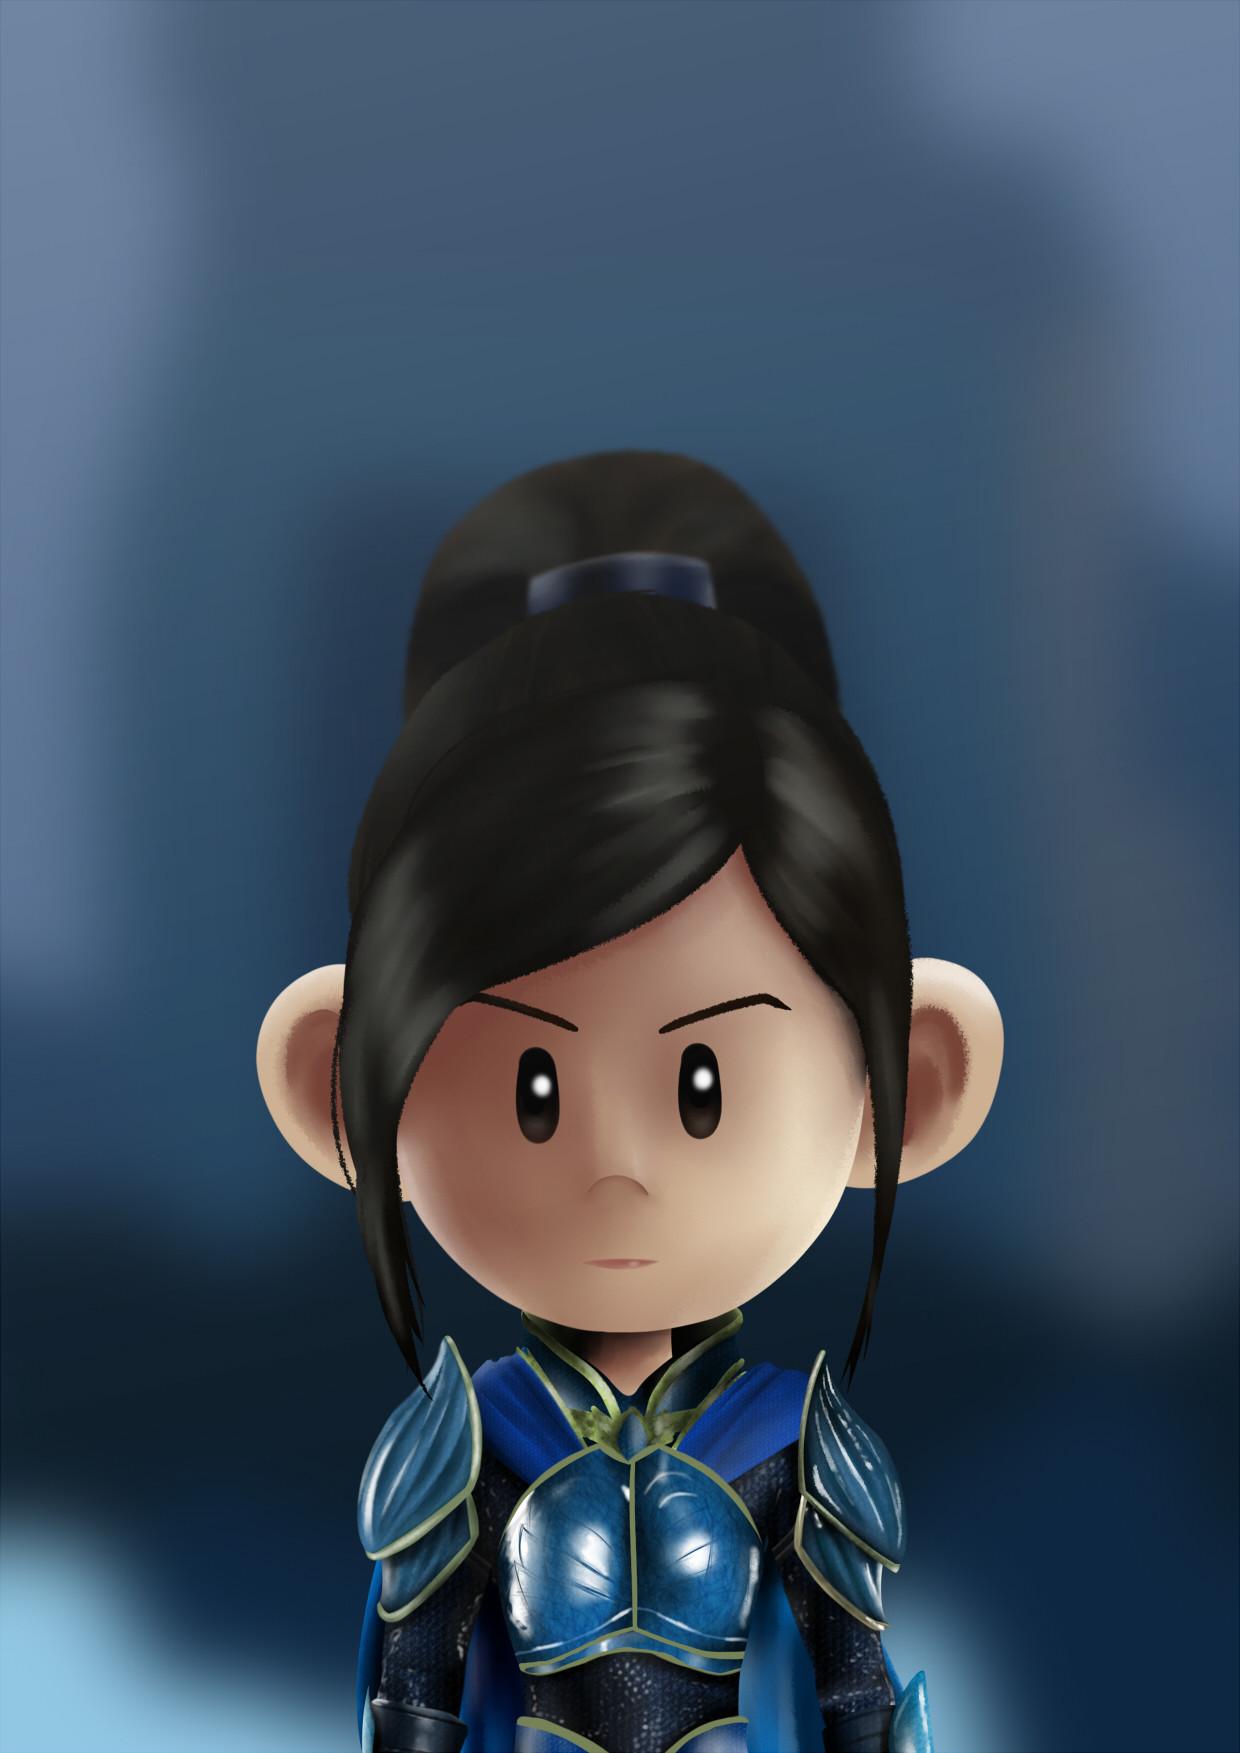 Commander Lin Mae from The Great Wall (film), Nurul